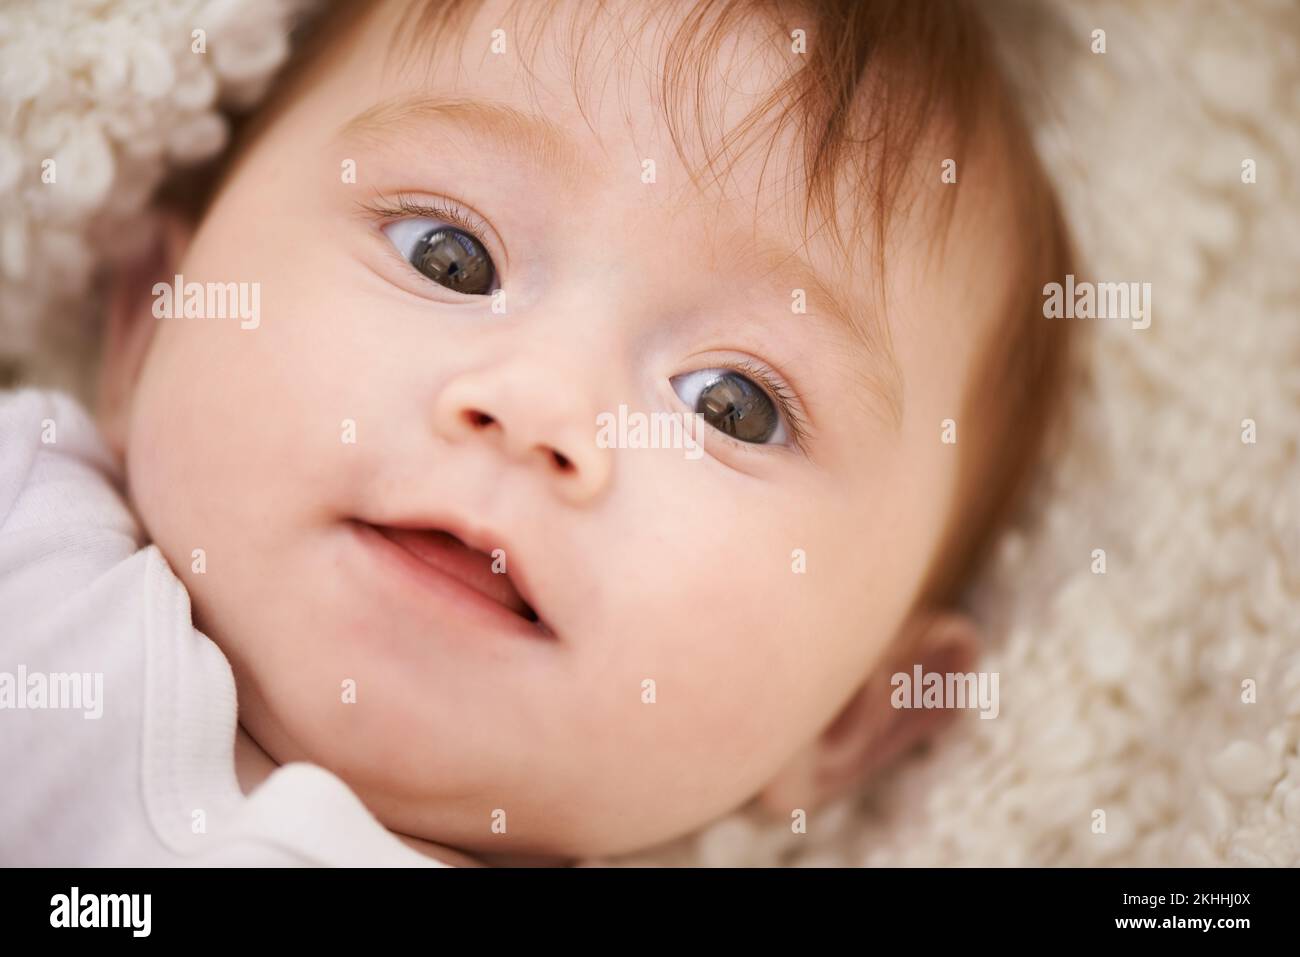 Eyes full of wonder. an adorable baby girl with red hair. Stock Photo